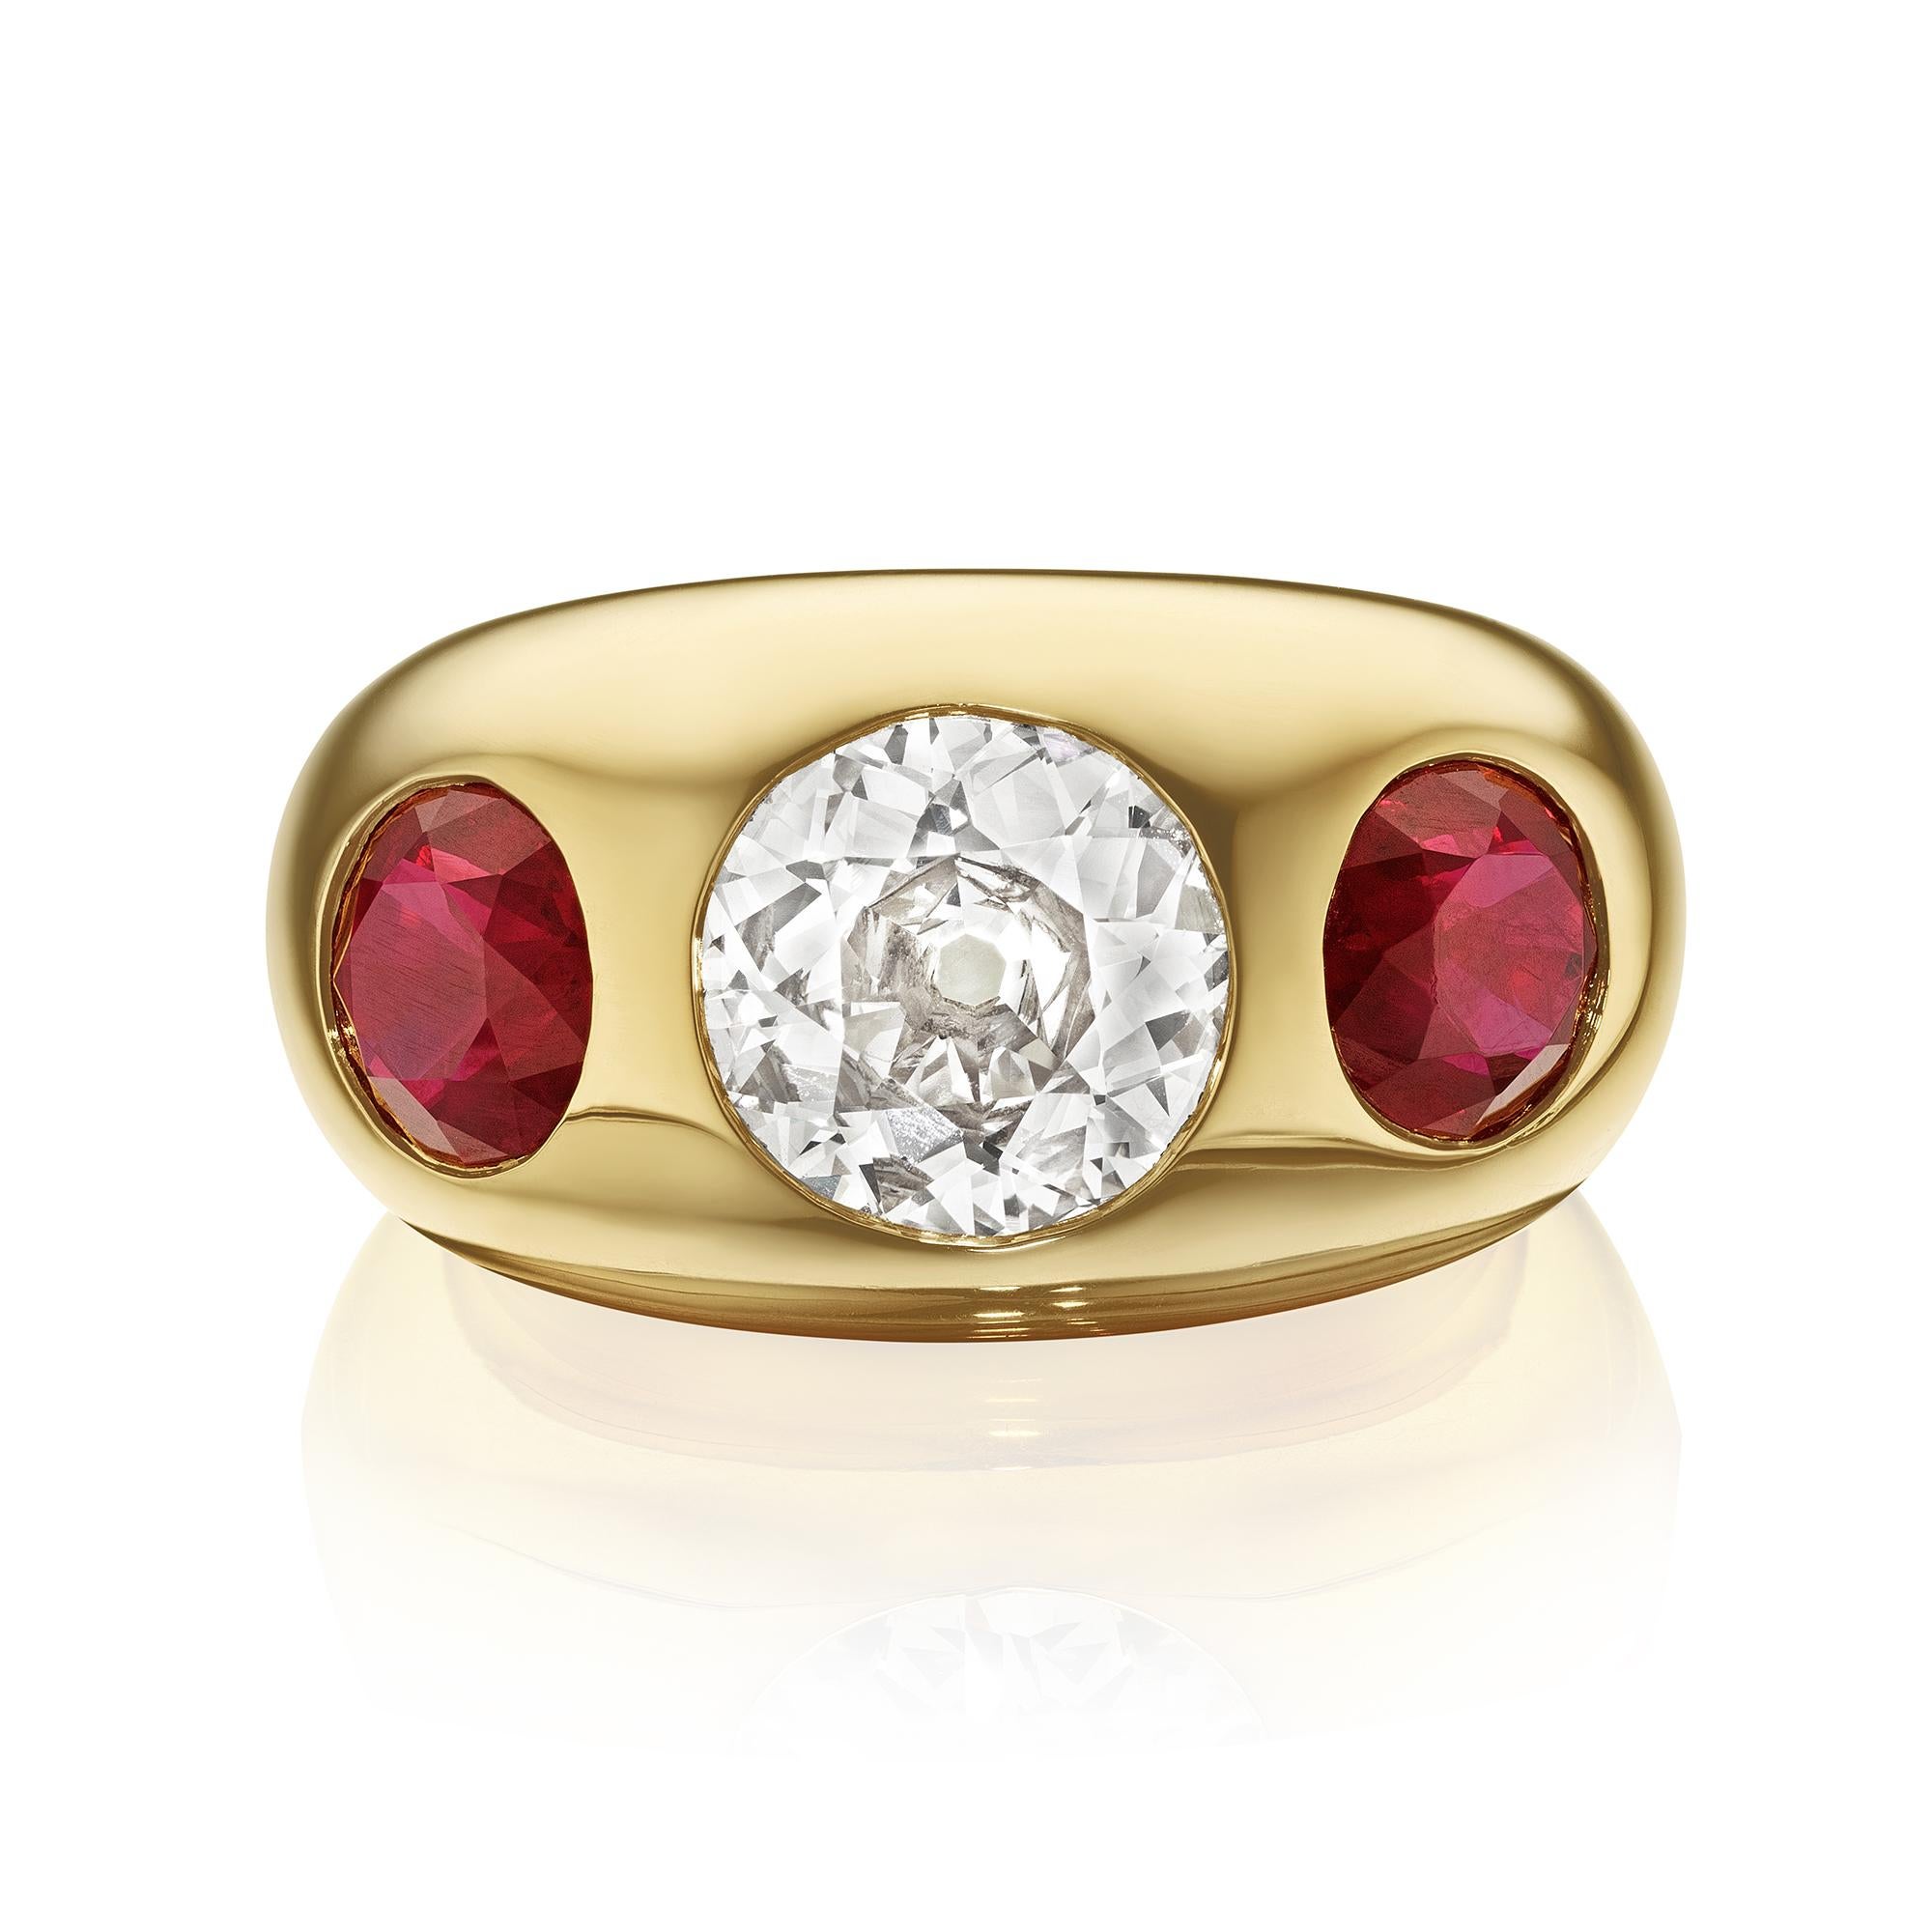 Gold Diamond and Ruby Ring by Siegelson, New York 
A ring composed of a central collet-set diamond sided by rubies; mounted in 18-karat gold
• 1 diamond; total weighing 1.79 carats
• 2 rubies; total weighing 2.59 carats
• Measurements: 7/8 x 15/18 x